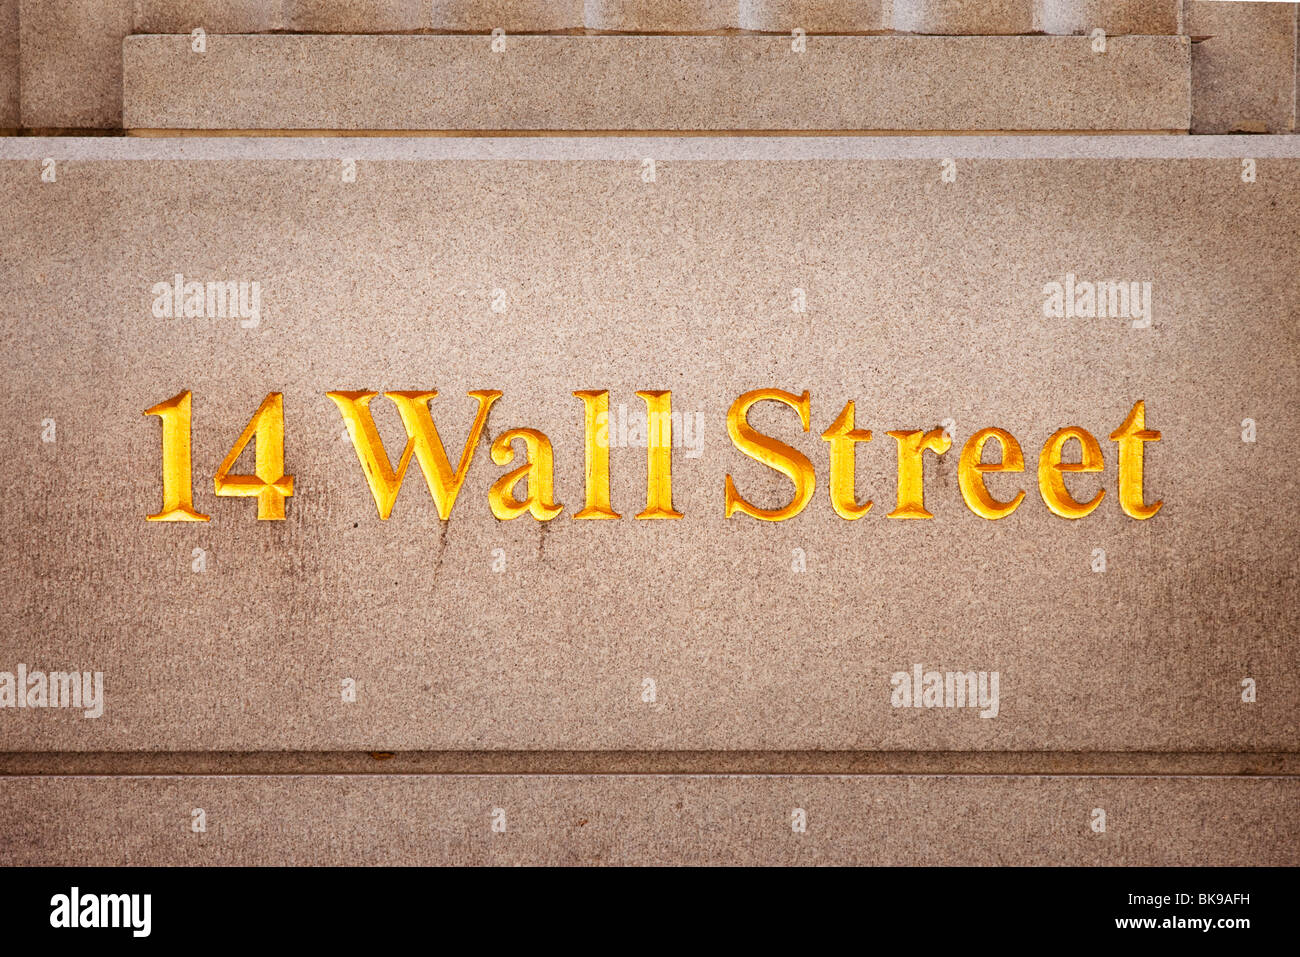 Wall Street sign engraved on the wall of a bank building along Wall Street, Lower Manhattan, New York City USA Stock Photo